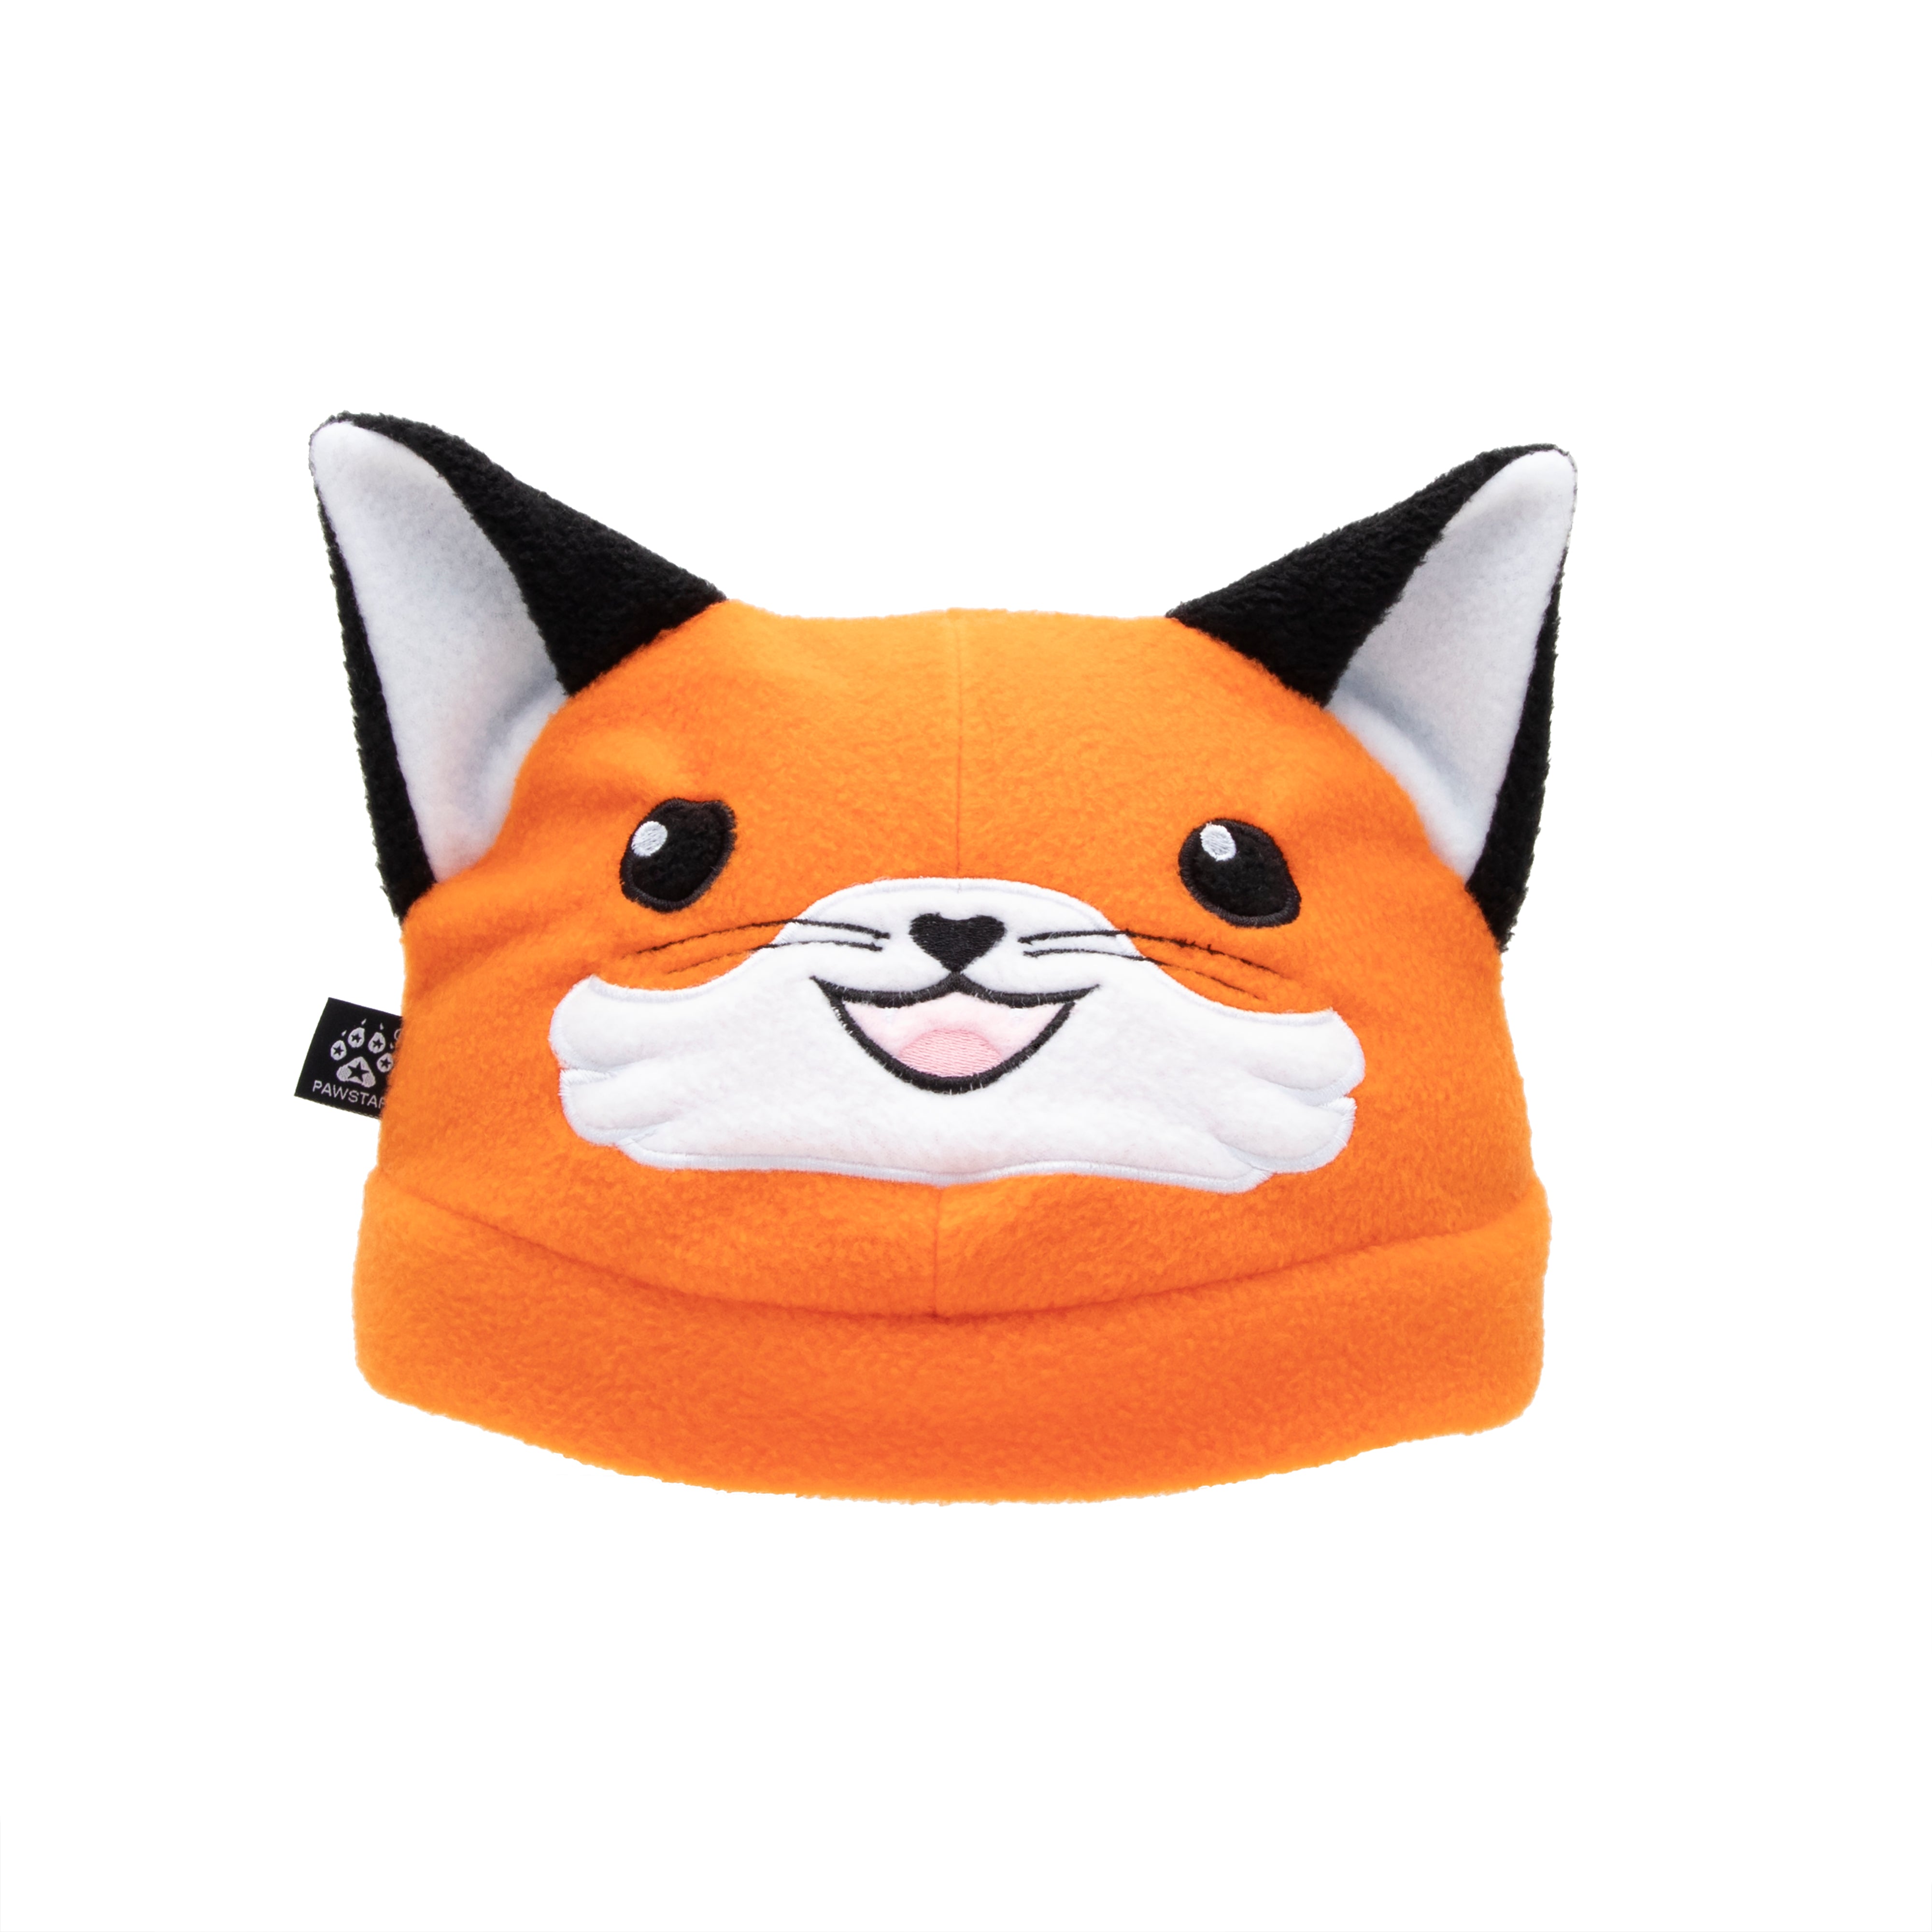 Pawstar Chuffins the Happy Fox Hat for cosplay halloween costume fursuit furry